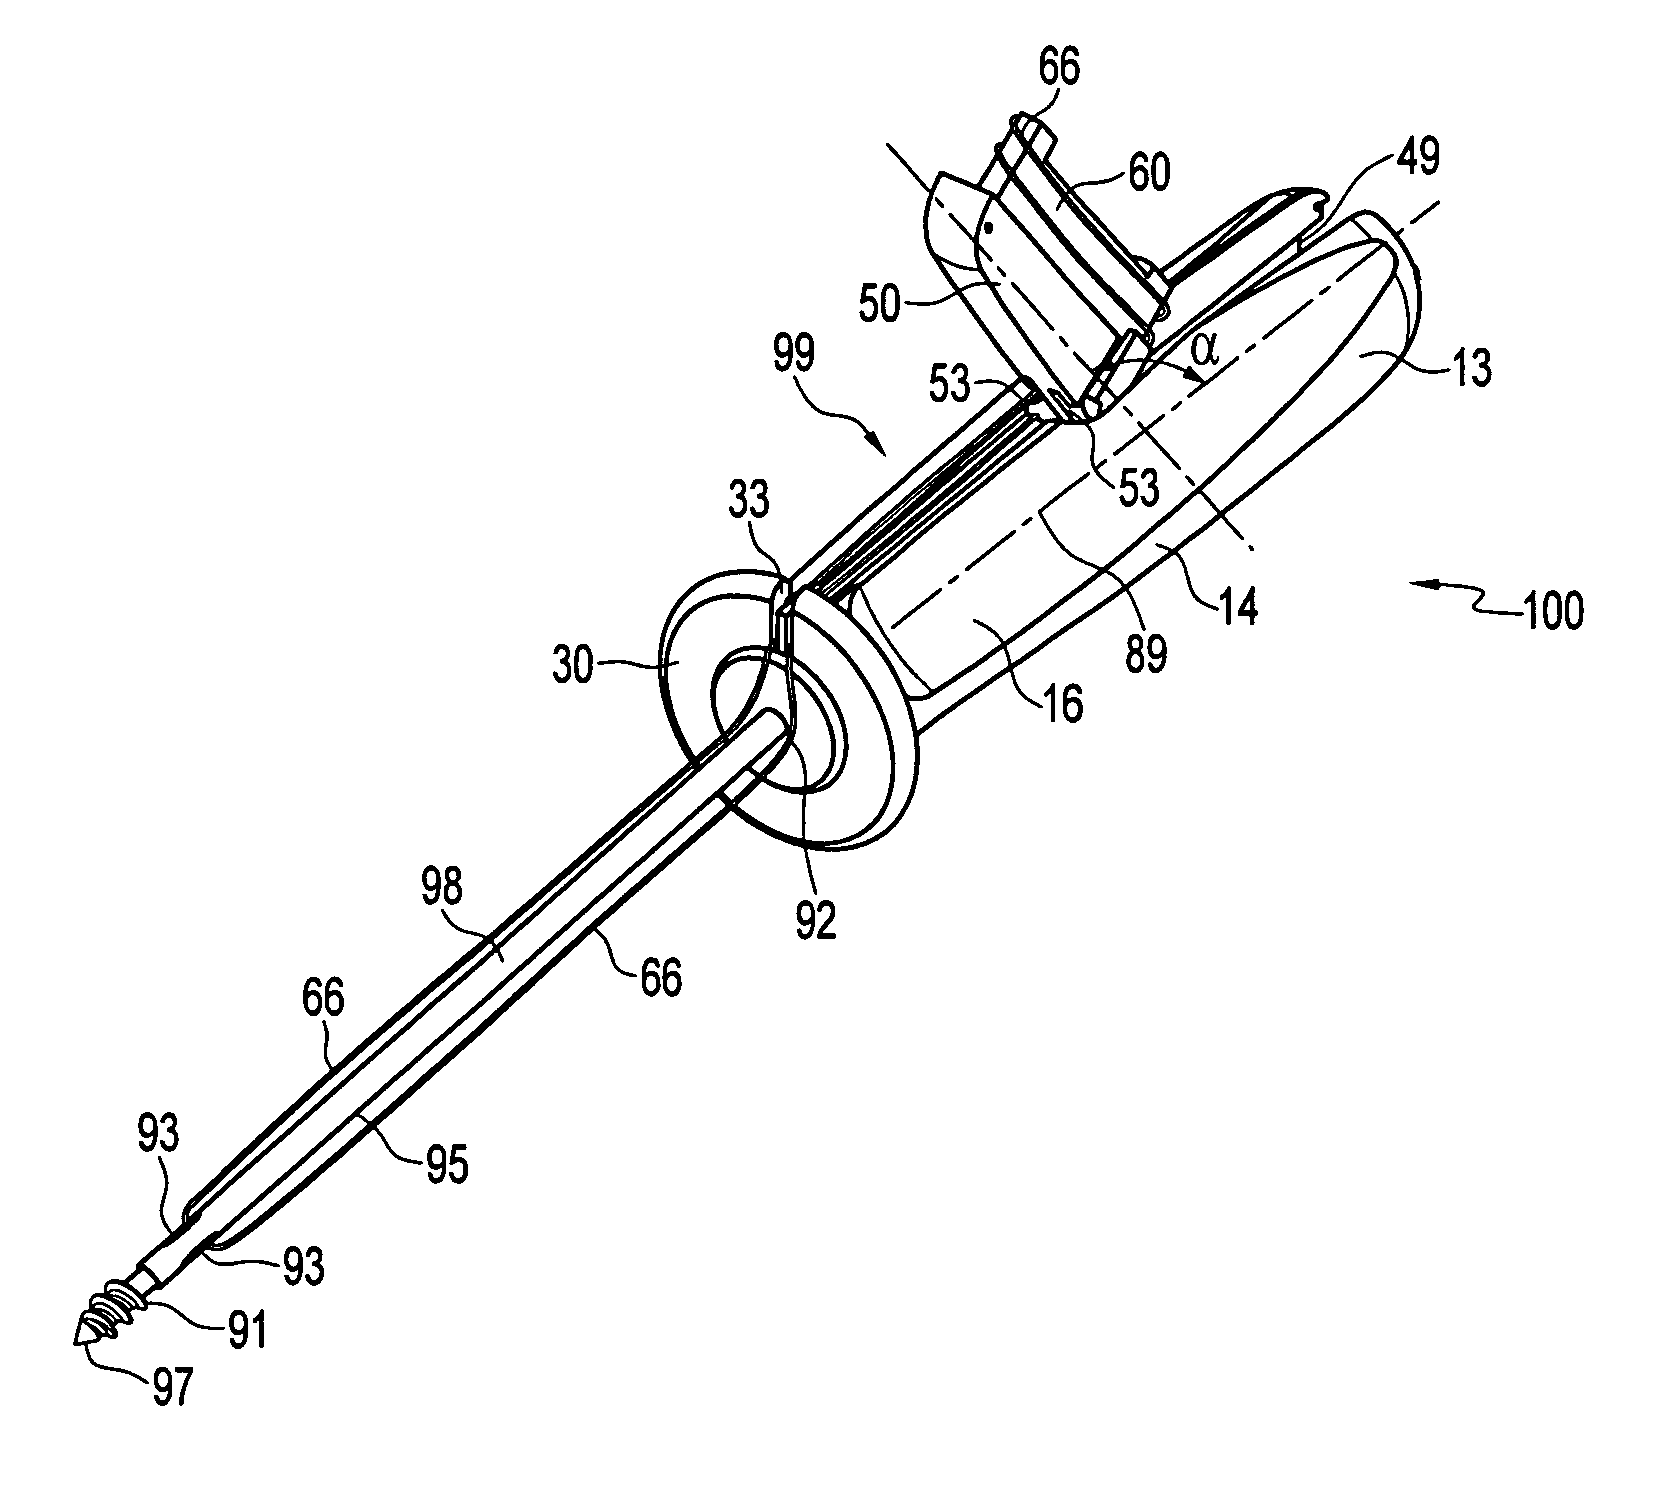 Instrument handle for storing suture and needles